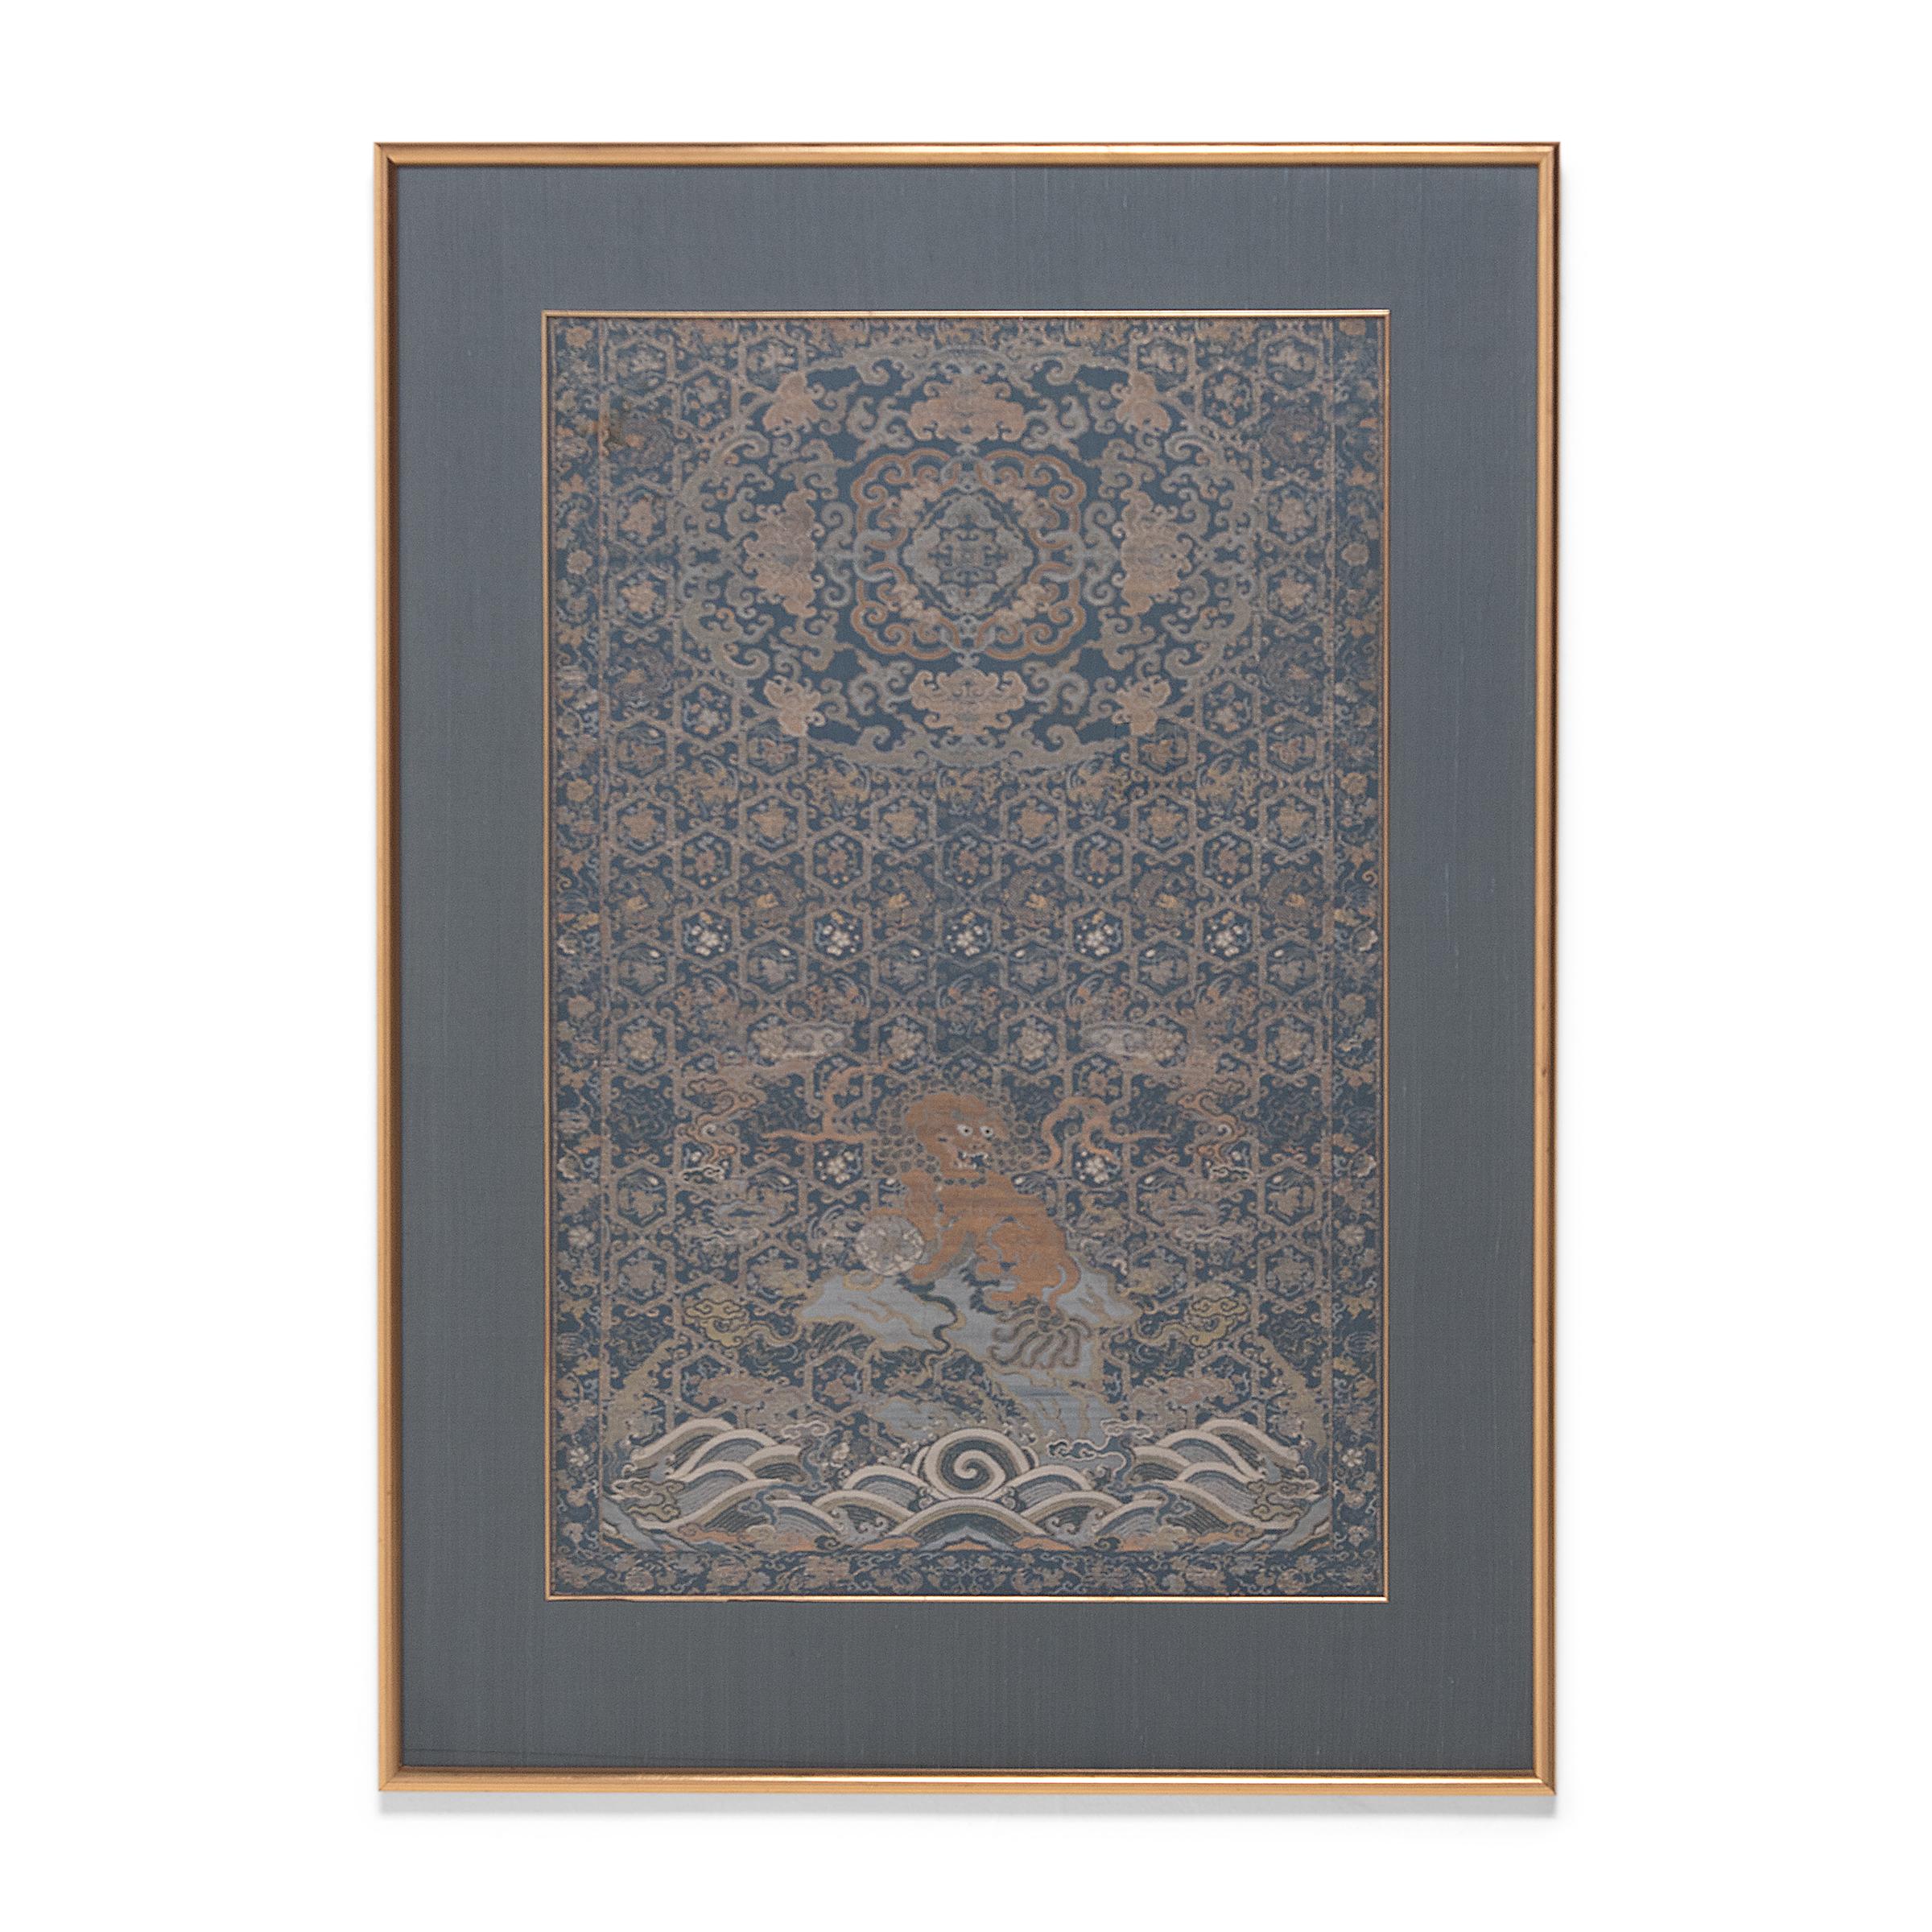 19th Century Pair of Framed Chinese Silk Brocade Chair Panels, c. 1850 For Sale